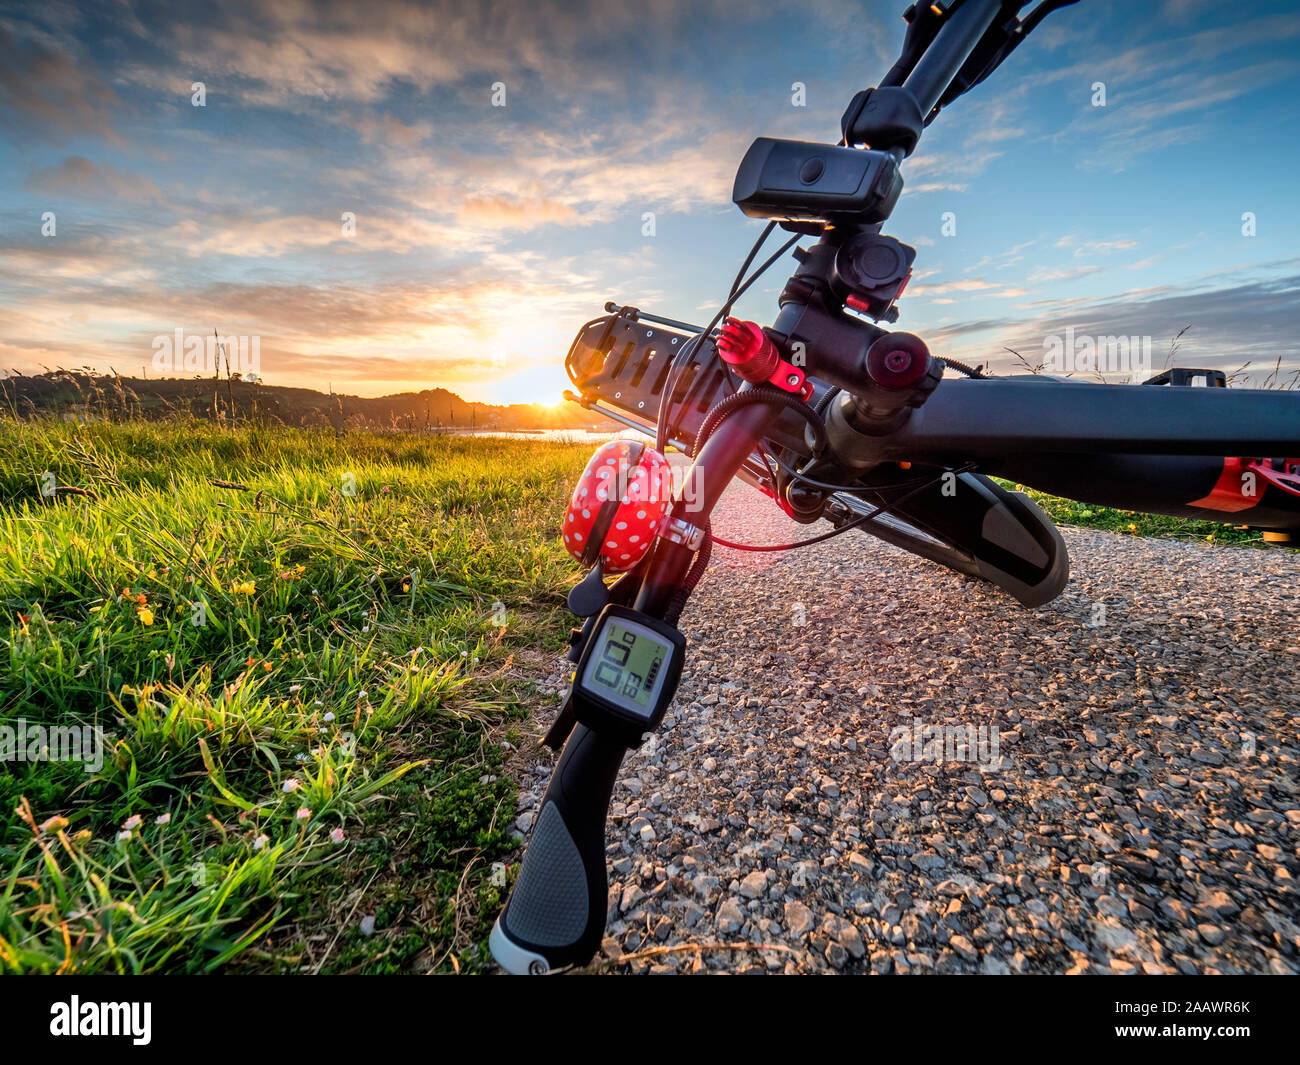 Bicycle fallen on road against sky during sunset, Perlora, Spain Stock Photo